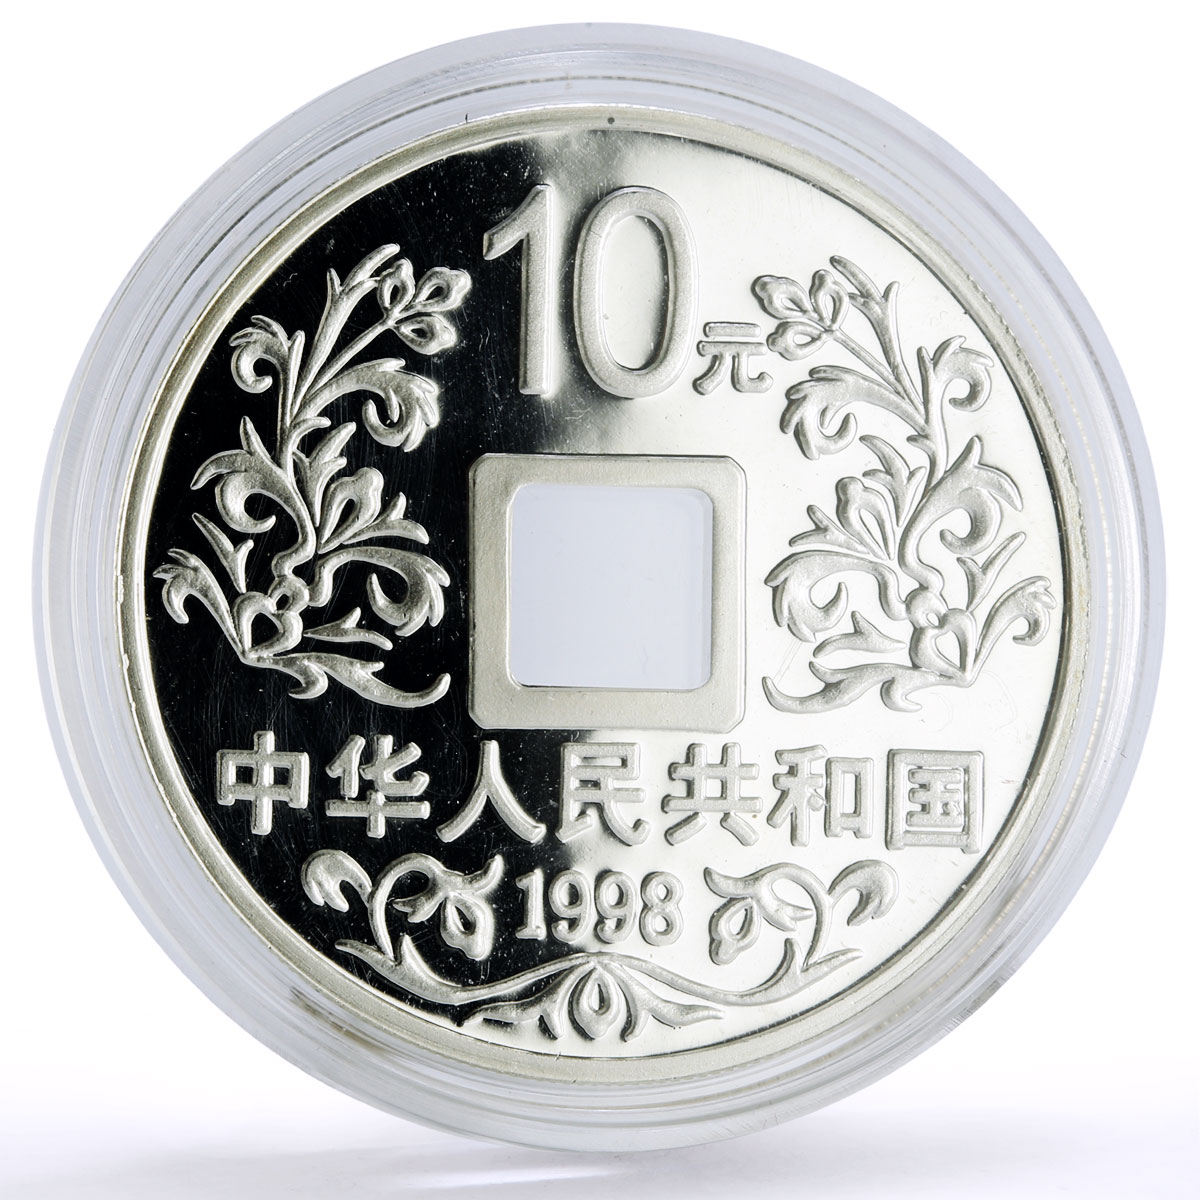 China 10 yuan Old Cash Dollar Coin Restrike KM-1196 proof silver coin 1998